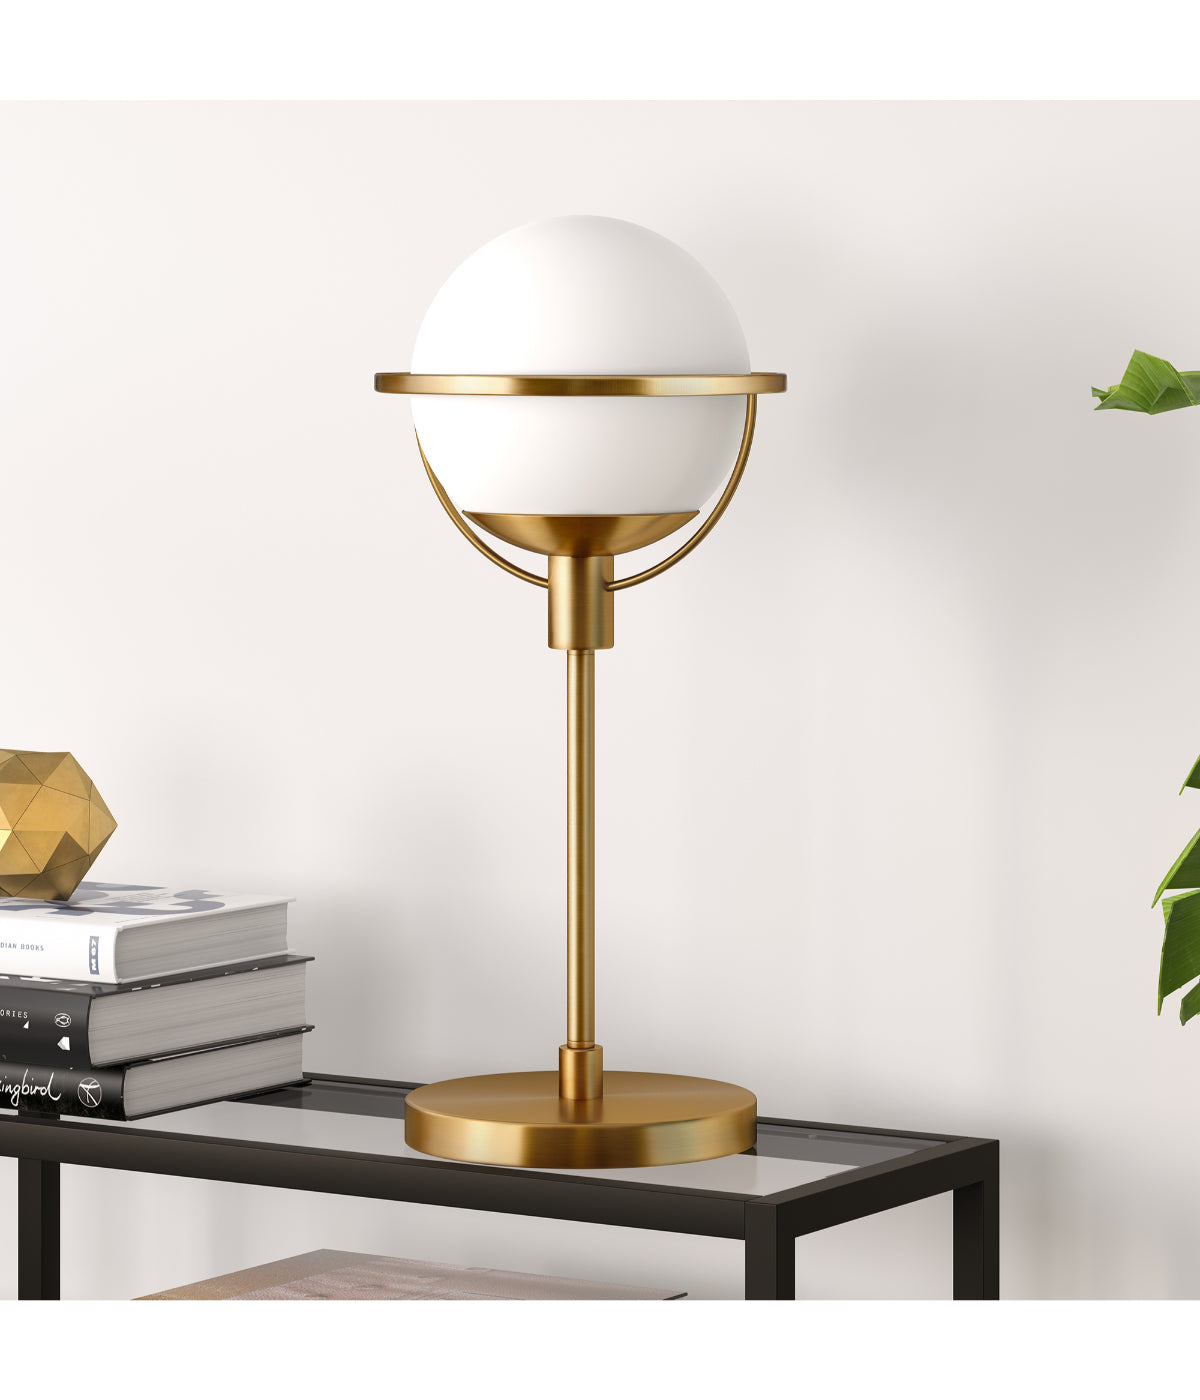 Jans Globe & Stem Table Lamp with Glass Shade Brass